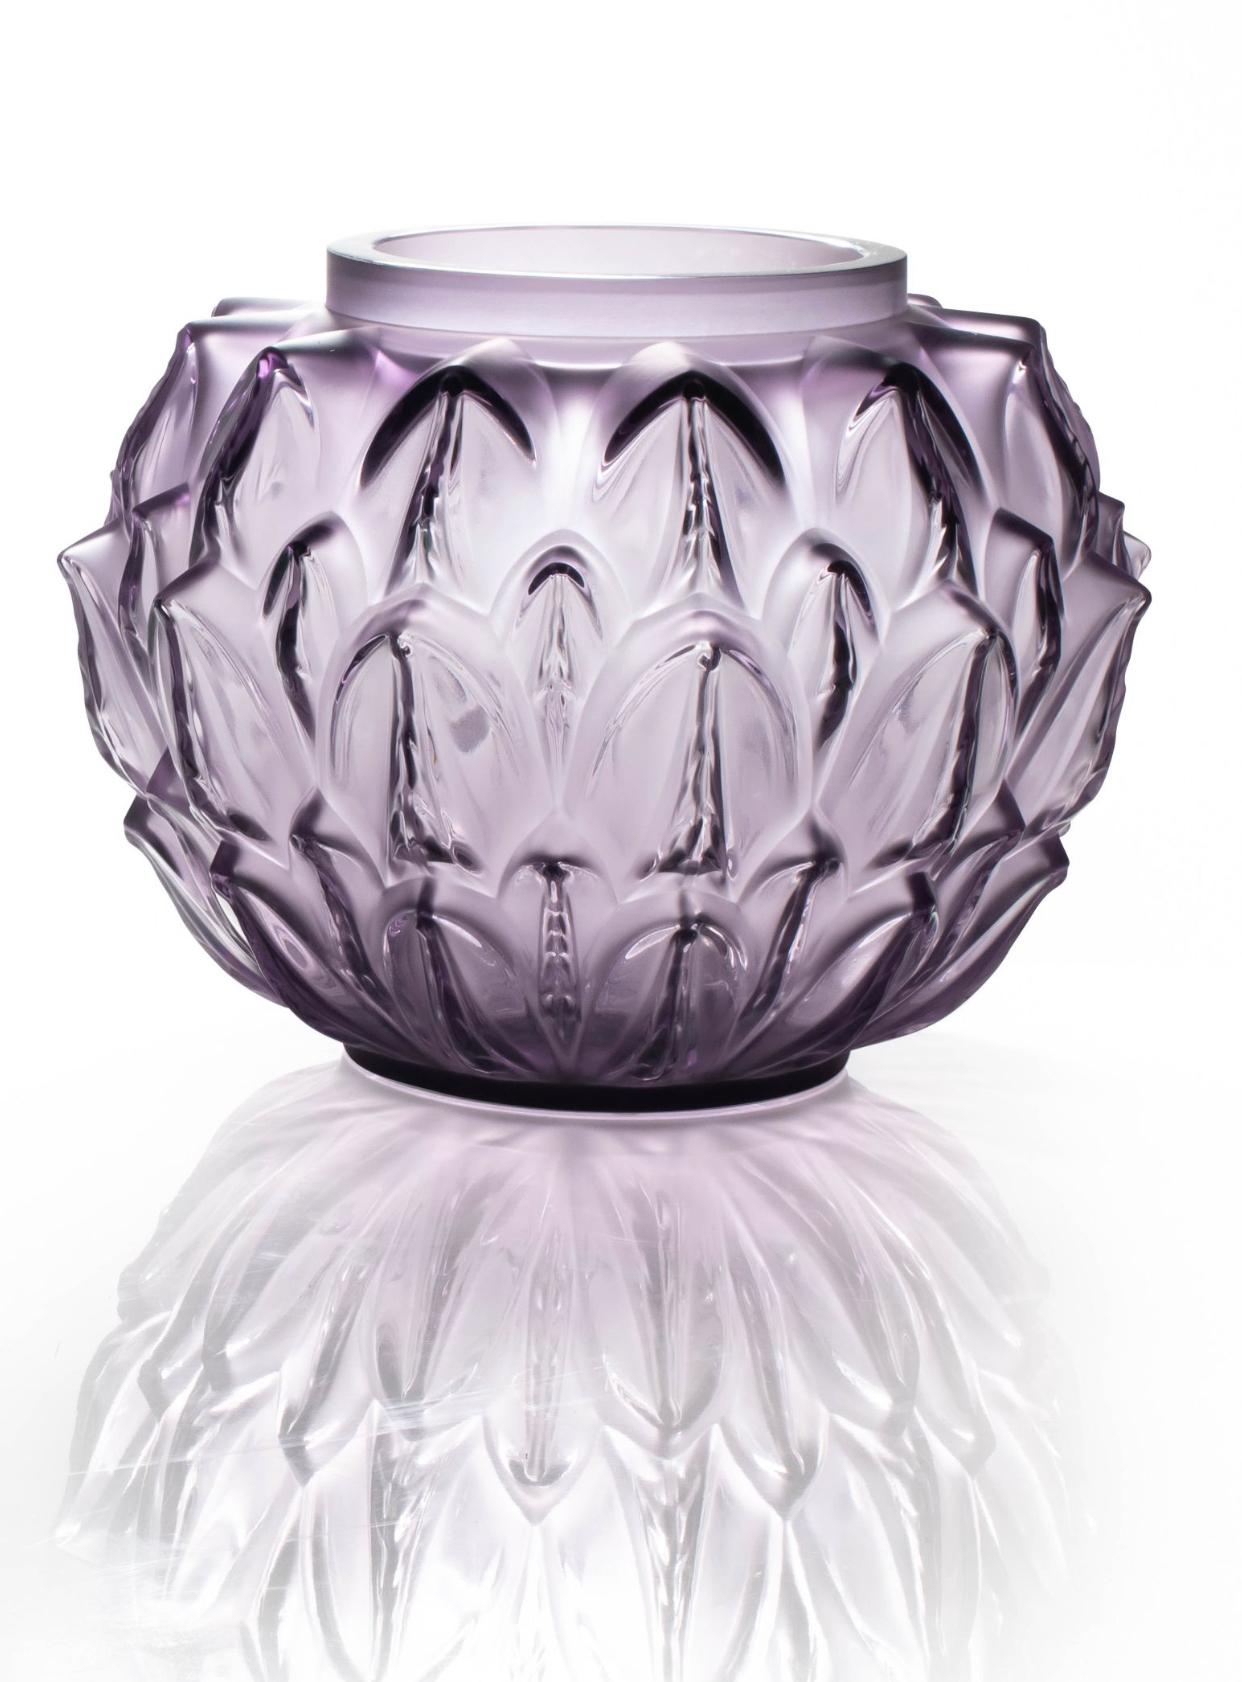 French Lalique France Cynara Vase in Light Purple Crystal as New in Box, Leaves